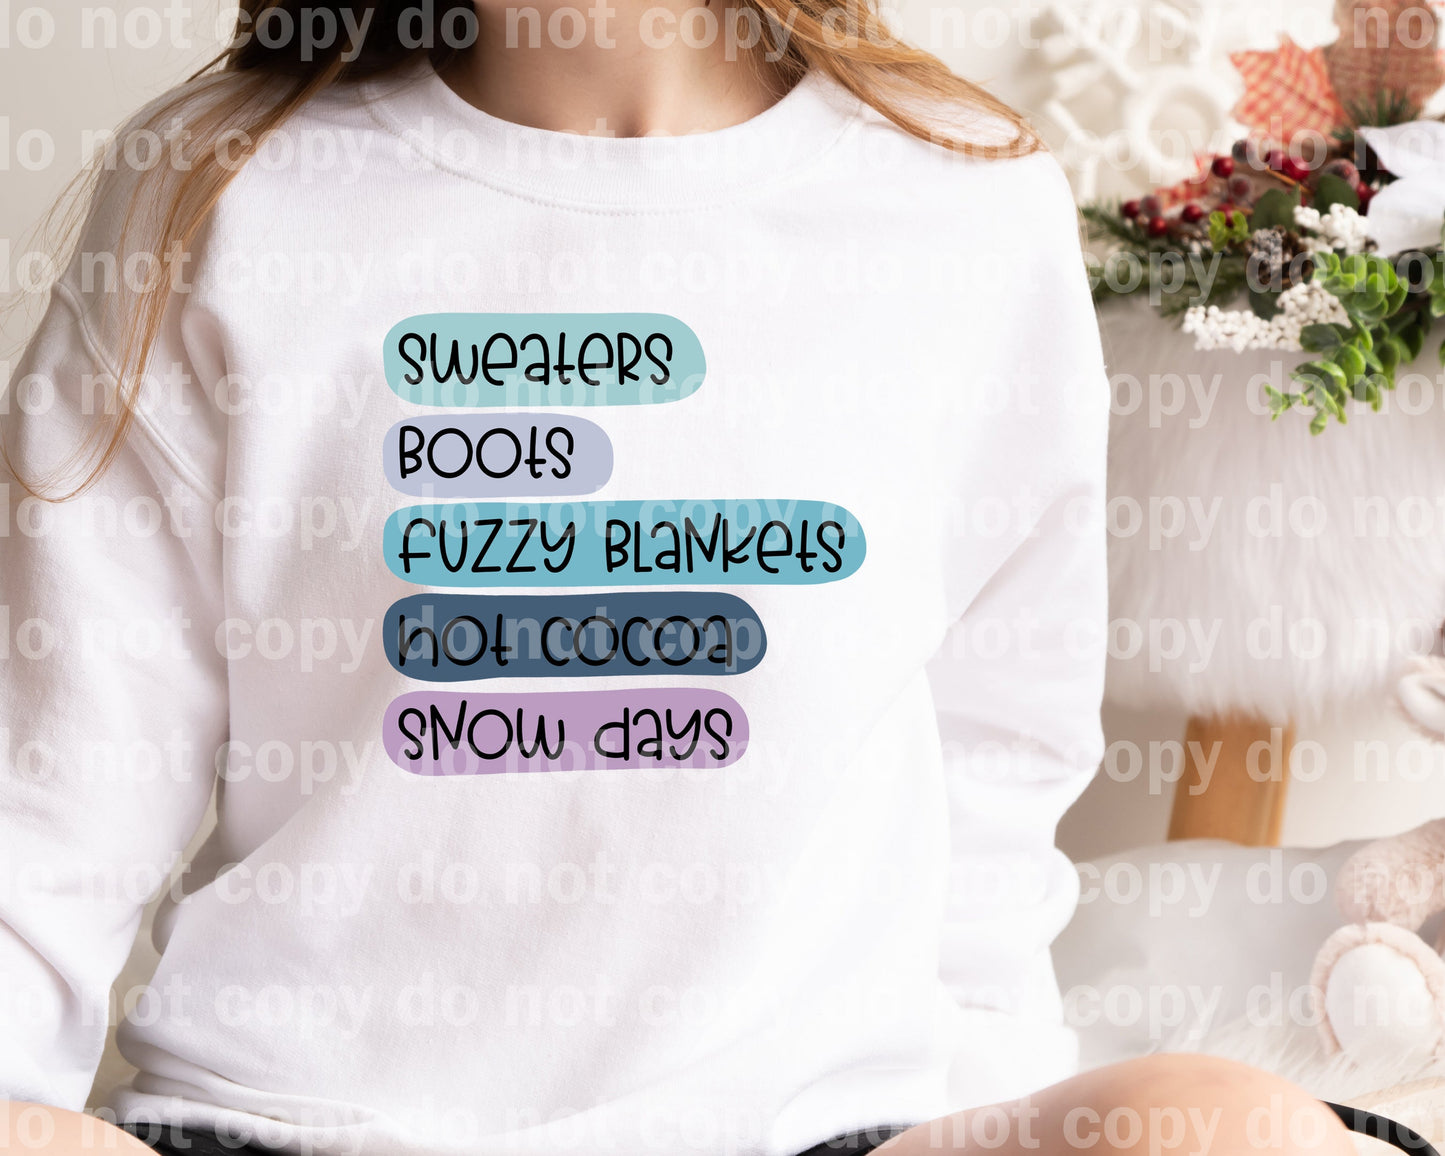 Sweaters Boots Fuzzy Blankets Hot Cocoa Snow Days Dream Print or Sublimation Print